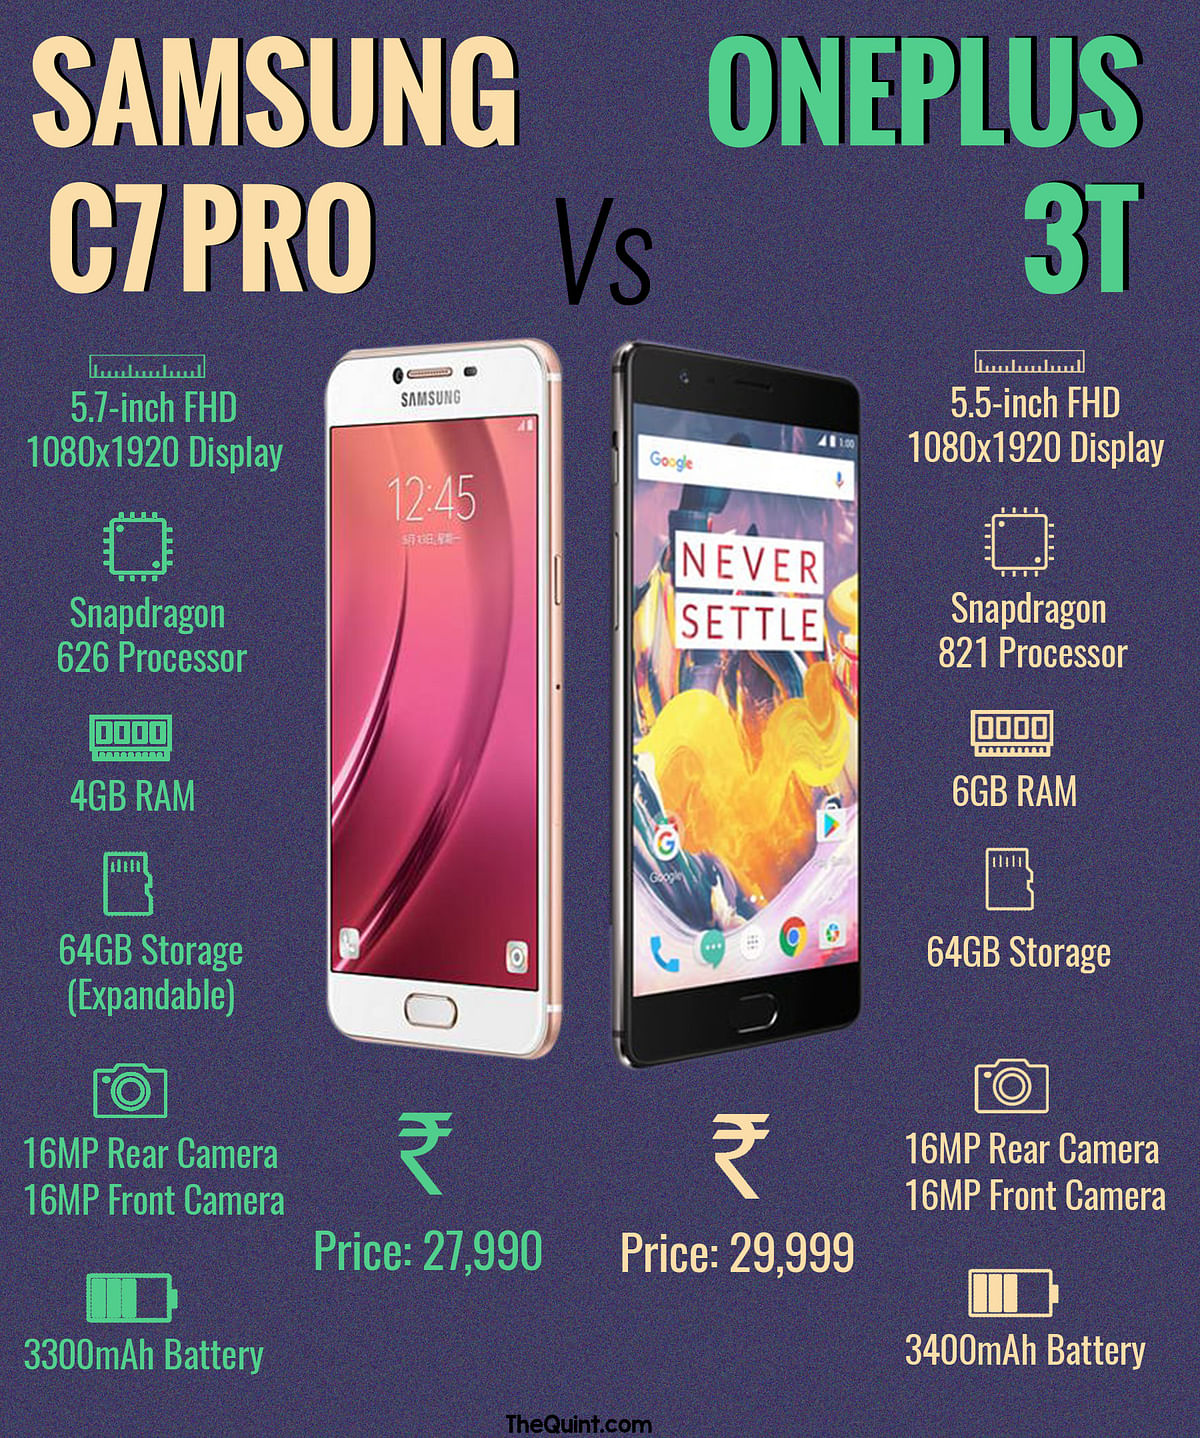 The best phone under 30,000 rupees? OnePlus 3T or the Samsung Galaxy C7 Pro?  Find Out!